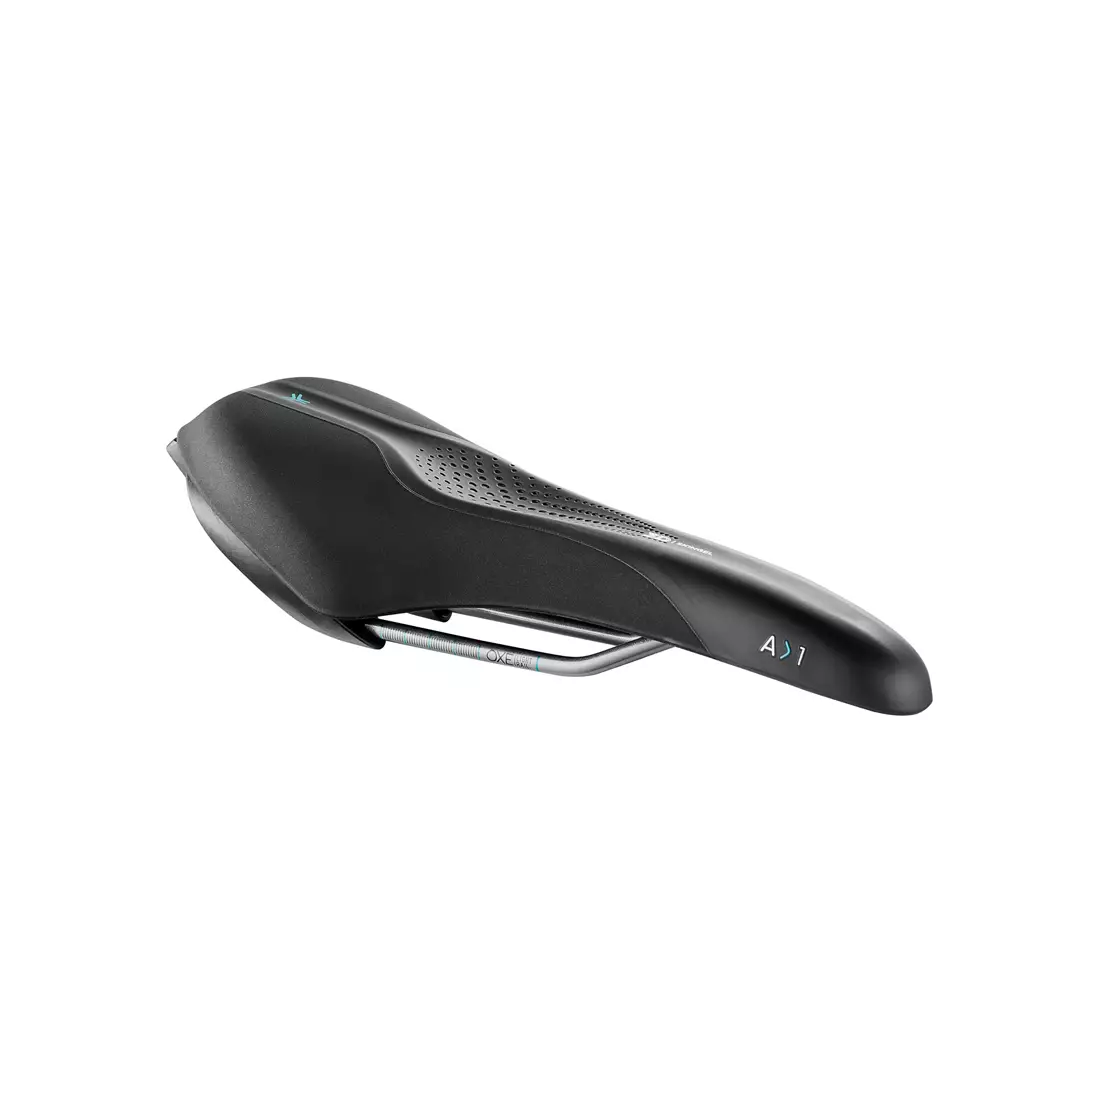 Bicycle saddle SELLEROYAL SCIENTIA ATHLETIC A1 SMALL 45st. gel + elastomers unisex SR-54A0SB0A09210